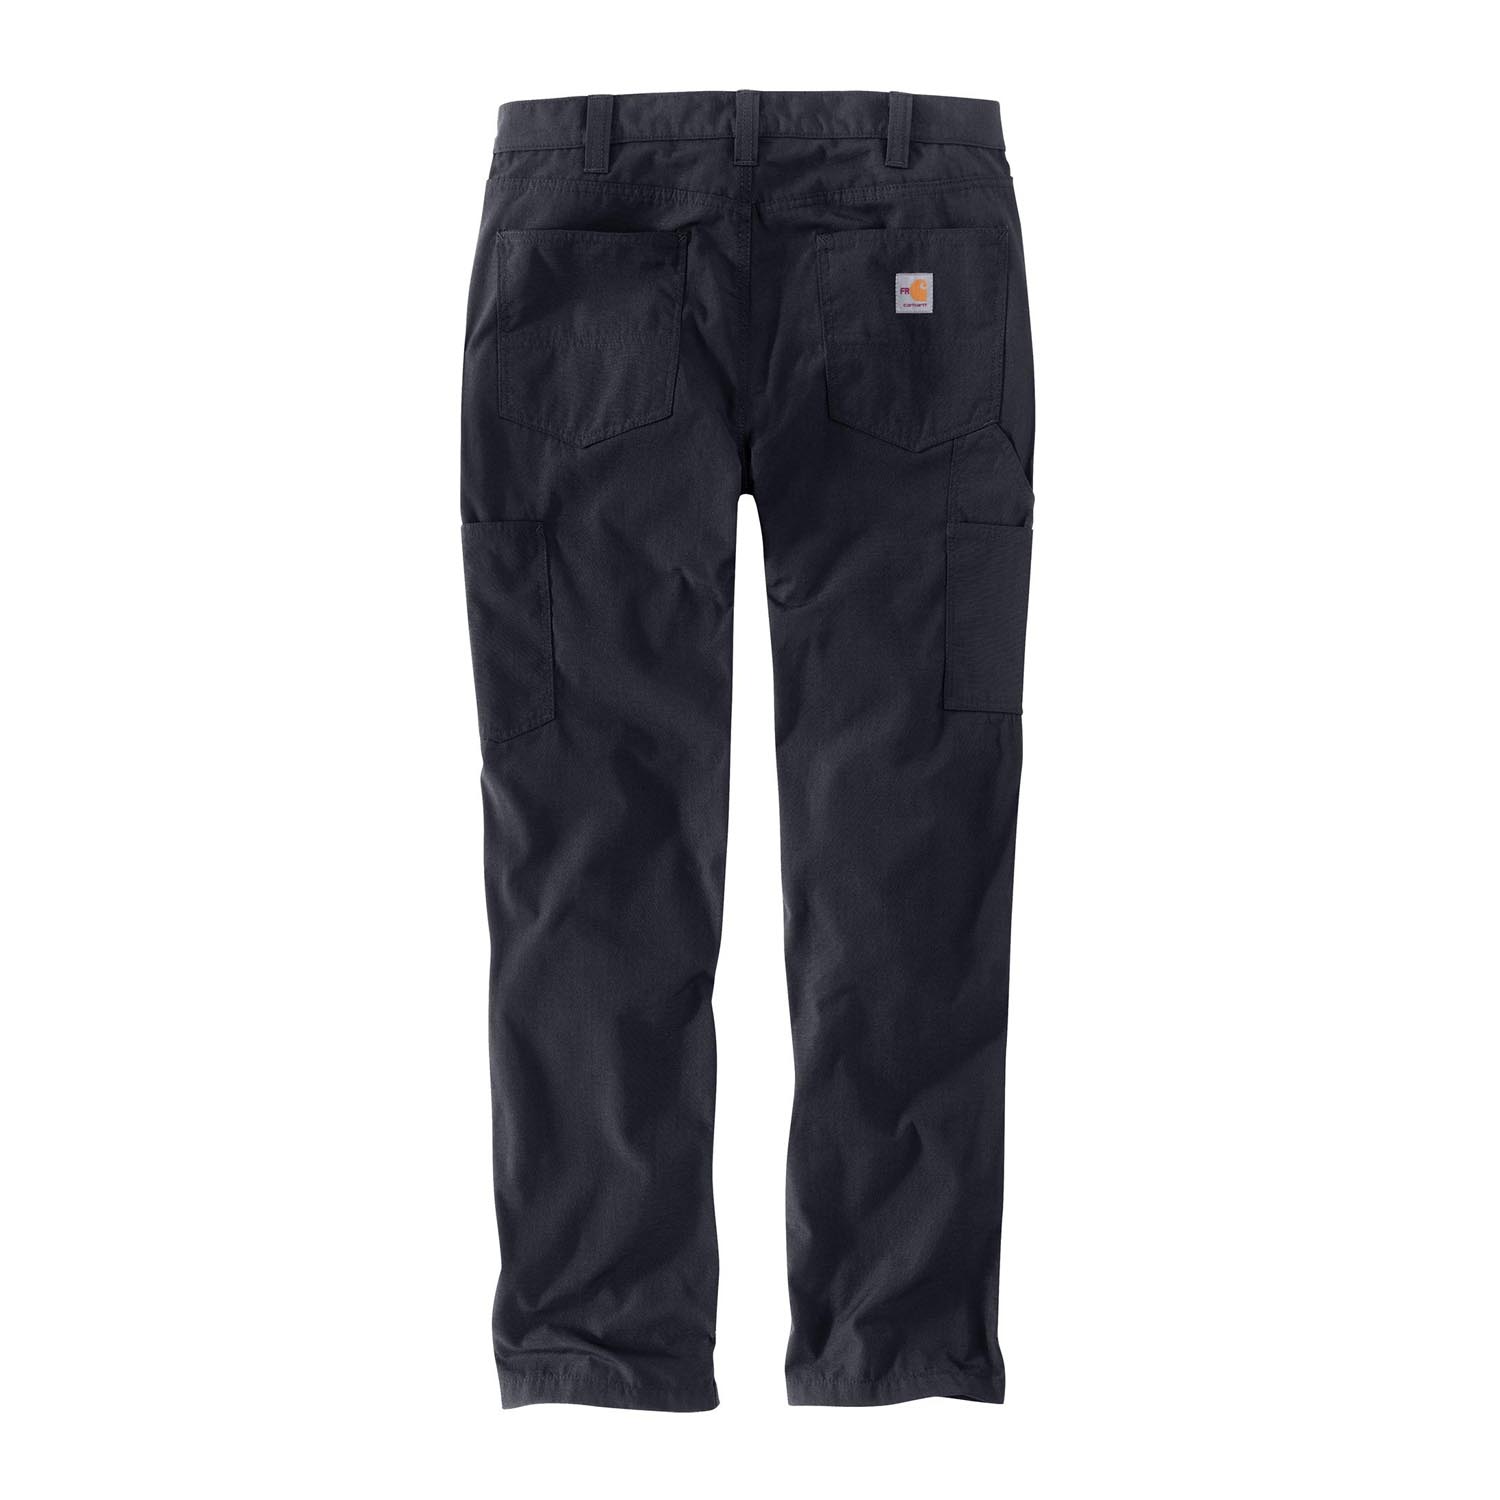 CARHARTT FLAME-RESISTANT FORCE RIPSTOP UTILITY WORK PANTS